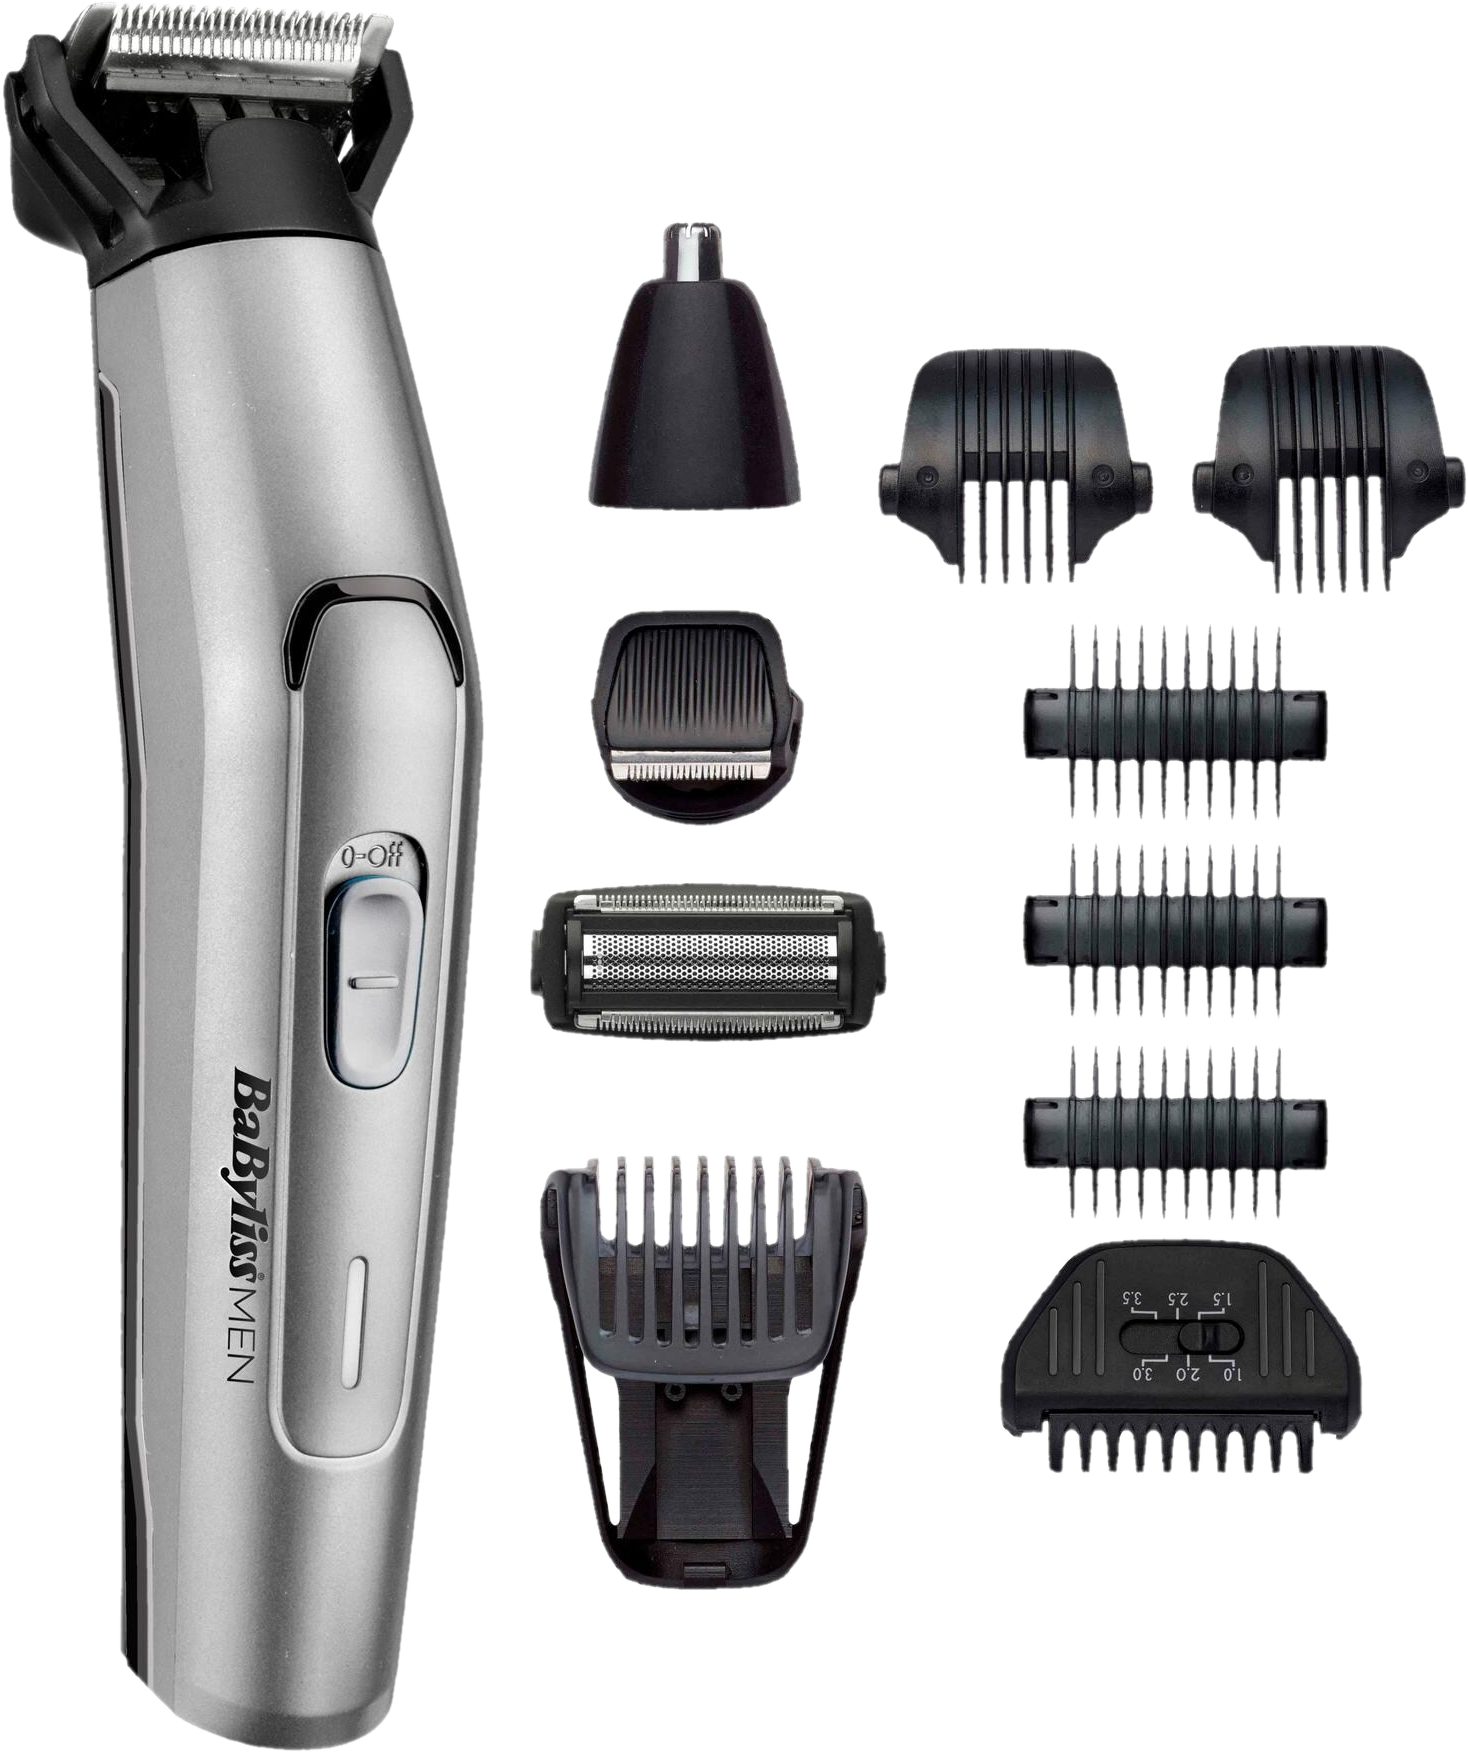 BABYLISS MT861E Multi 11in1 - Tondeuse multistyles (Argent)